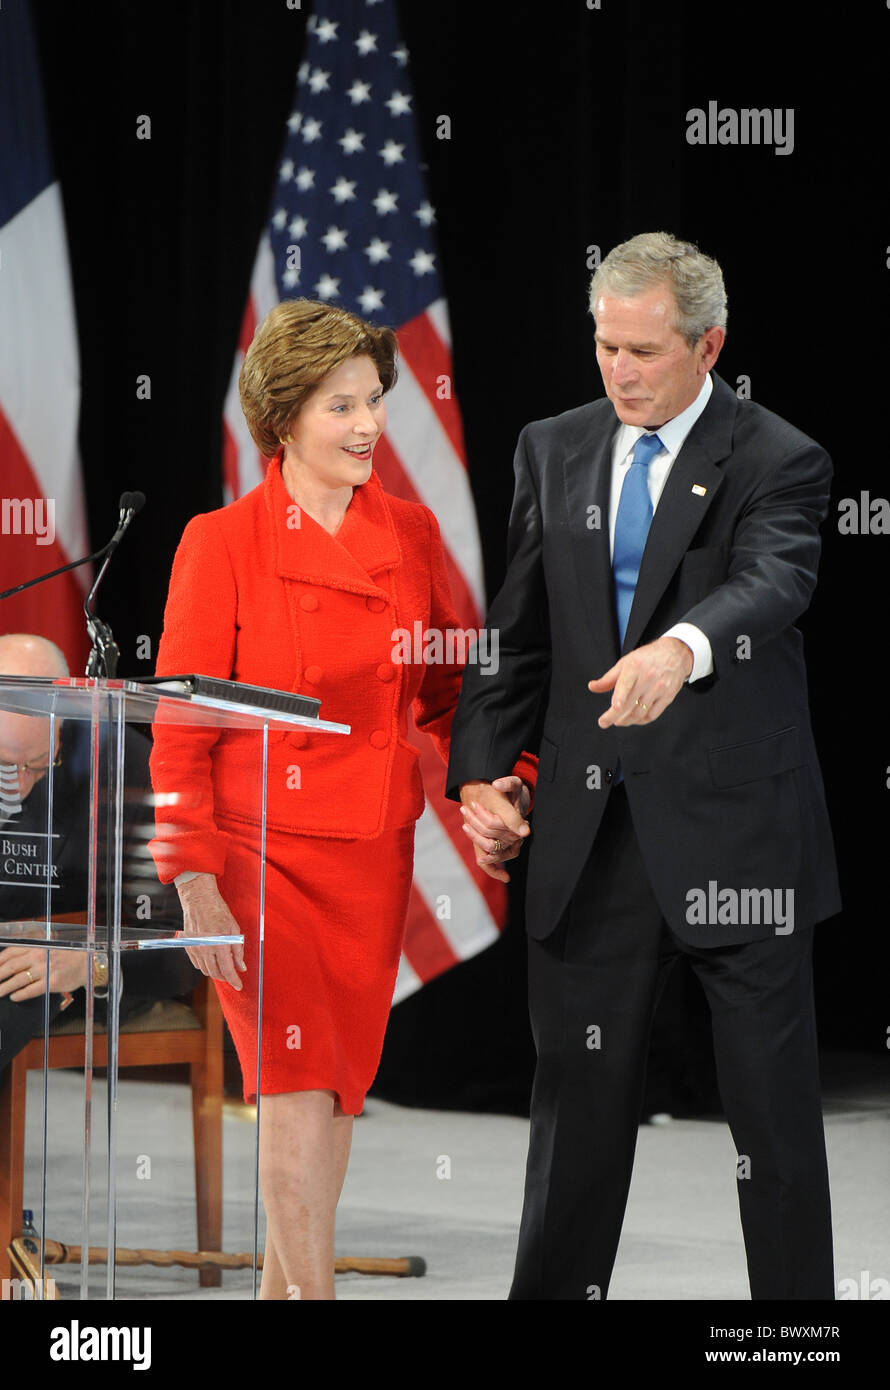 George W. Bush and wife Laura Bush at the ground breaking ceremony for the George W. Bush Presidential Library in Dallas Texas Stock Photo